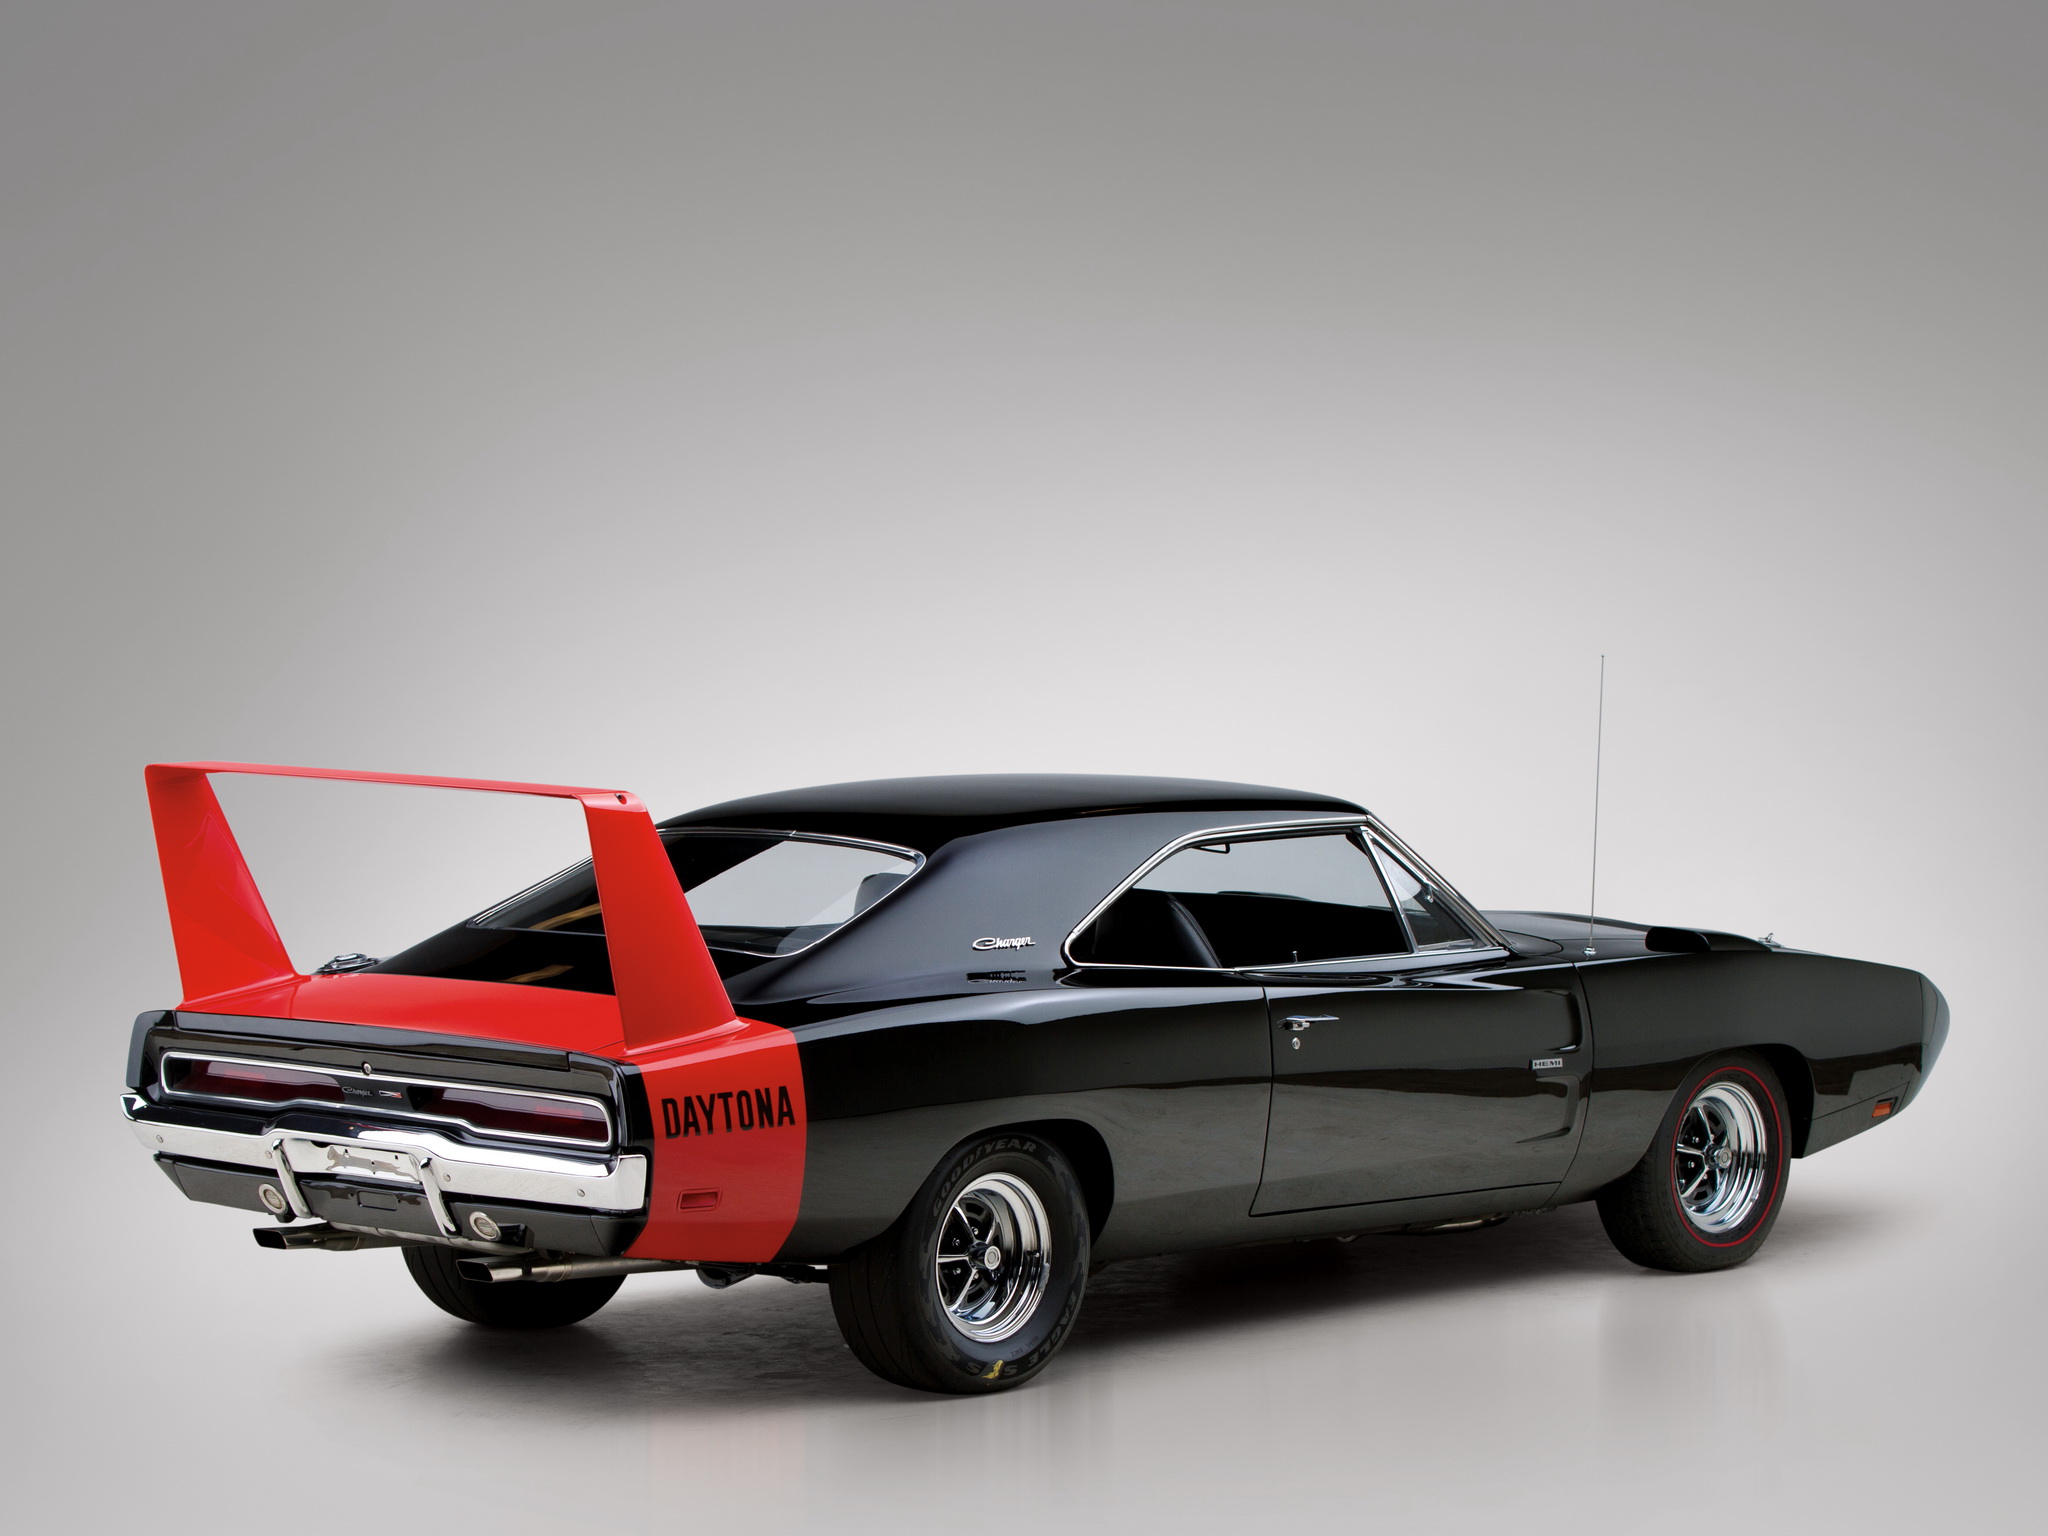 1970 dodge charger iphone wallpaper